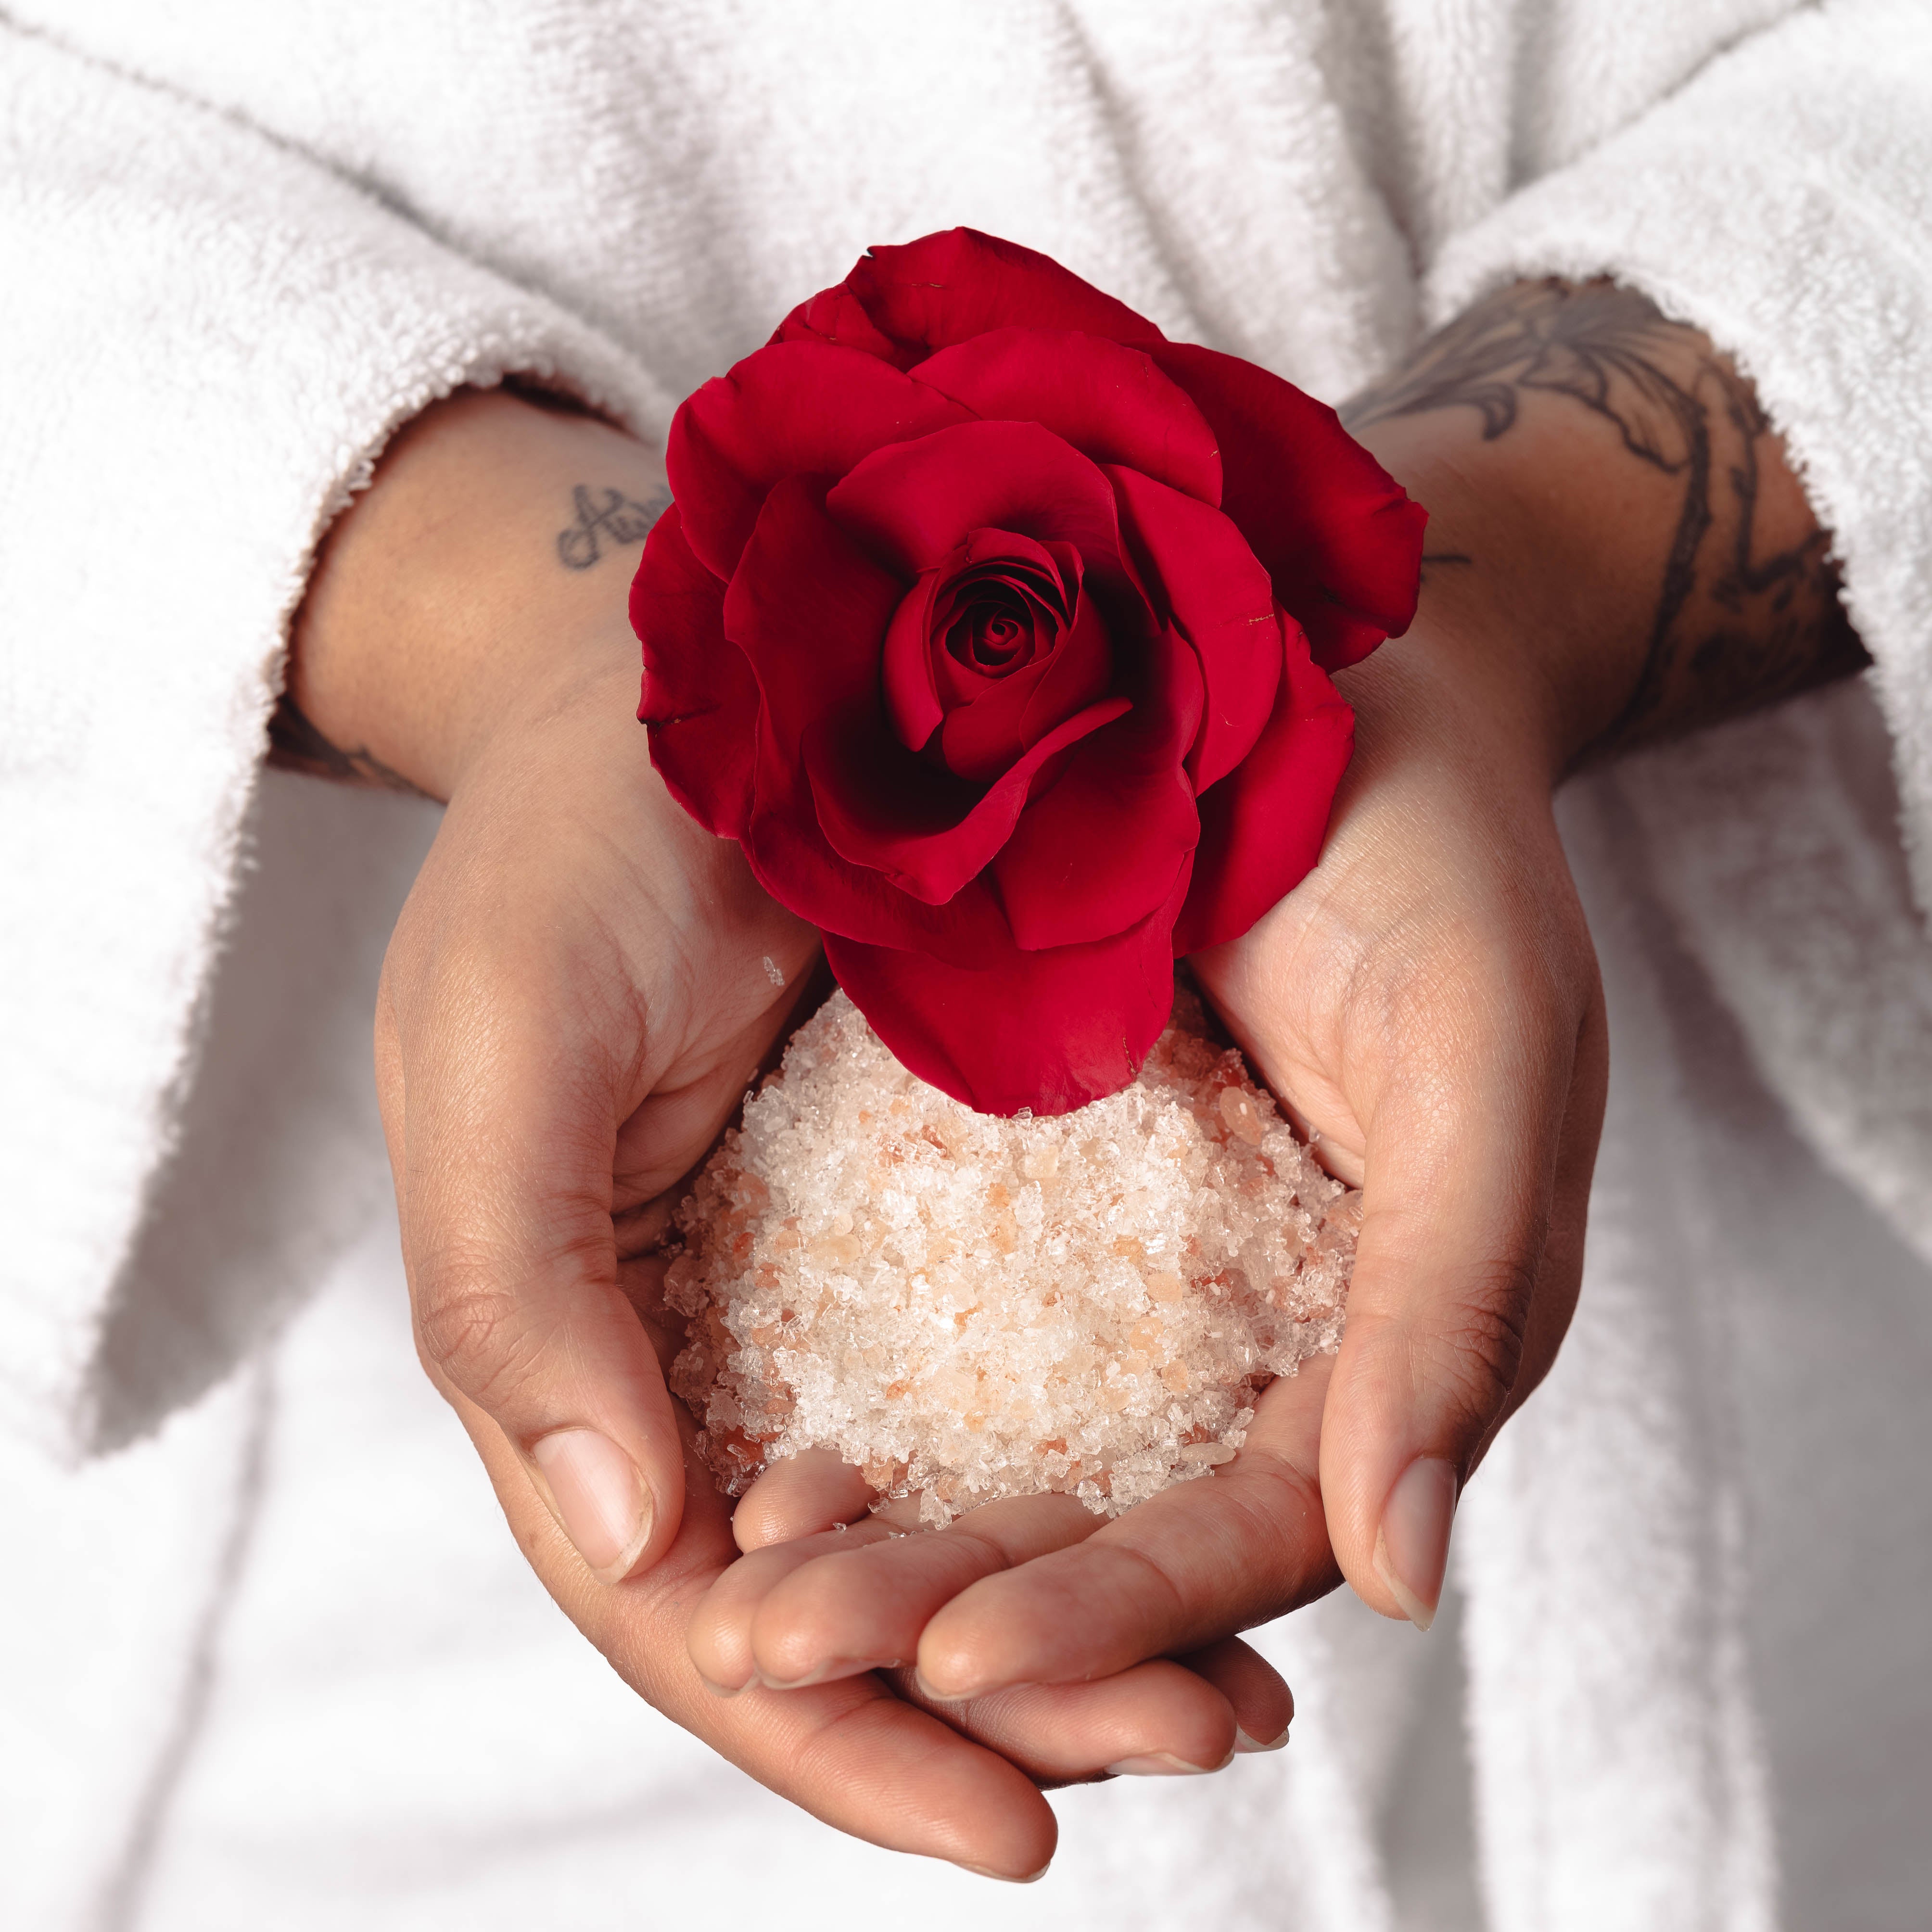 Two hands holding rose essential oil scented bath soaking salts with a red rose. 